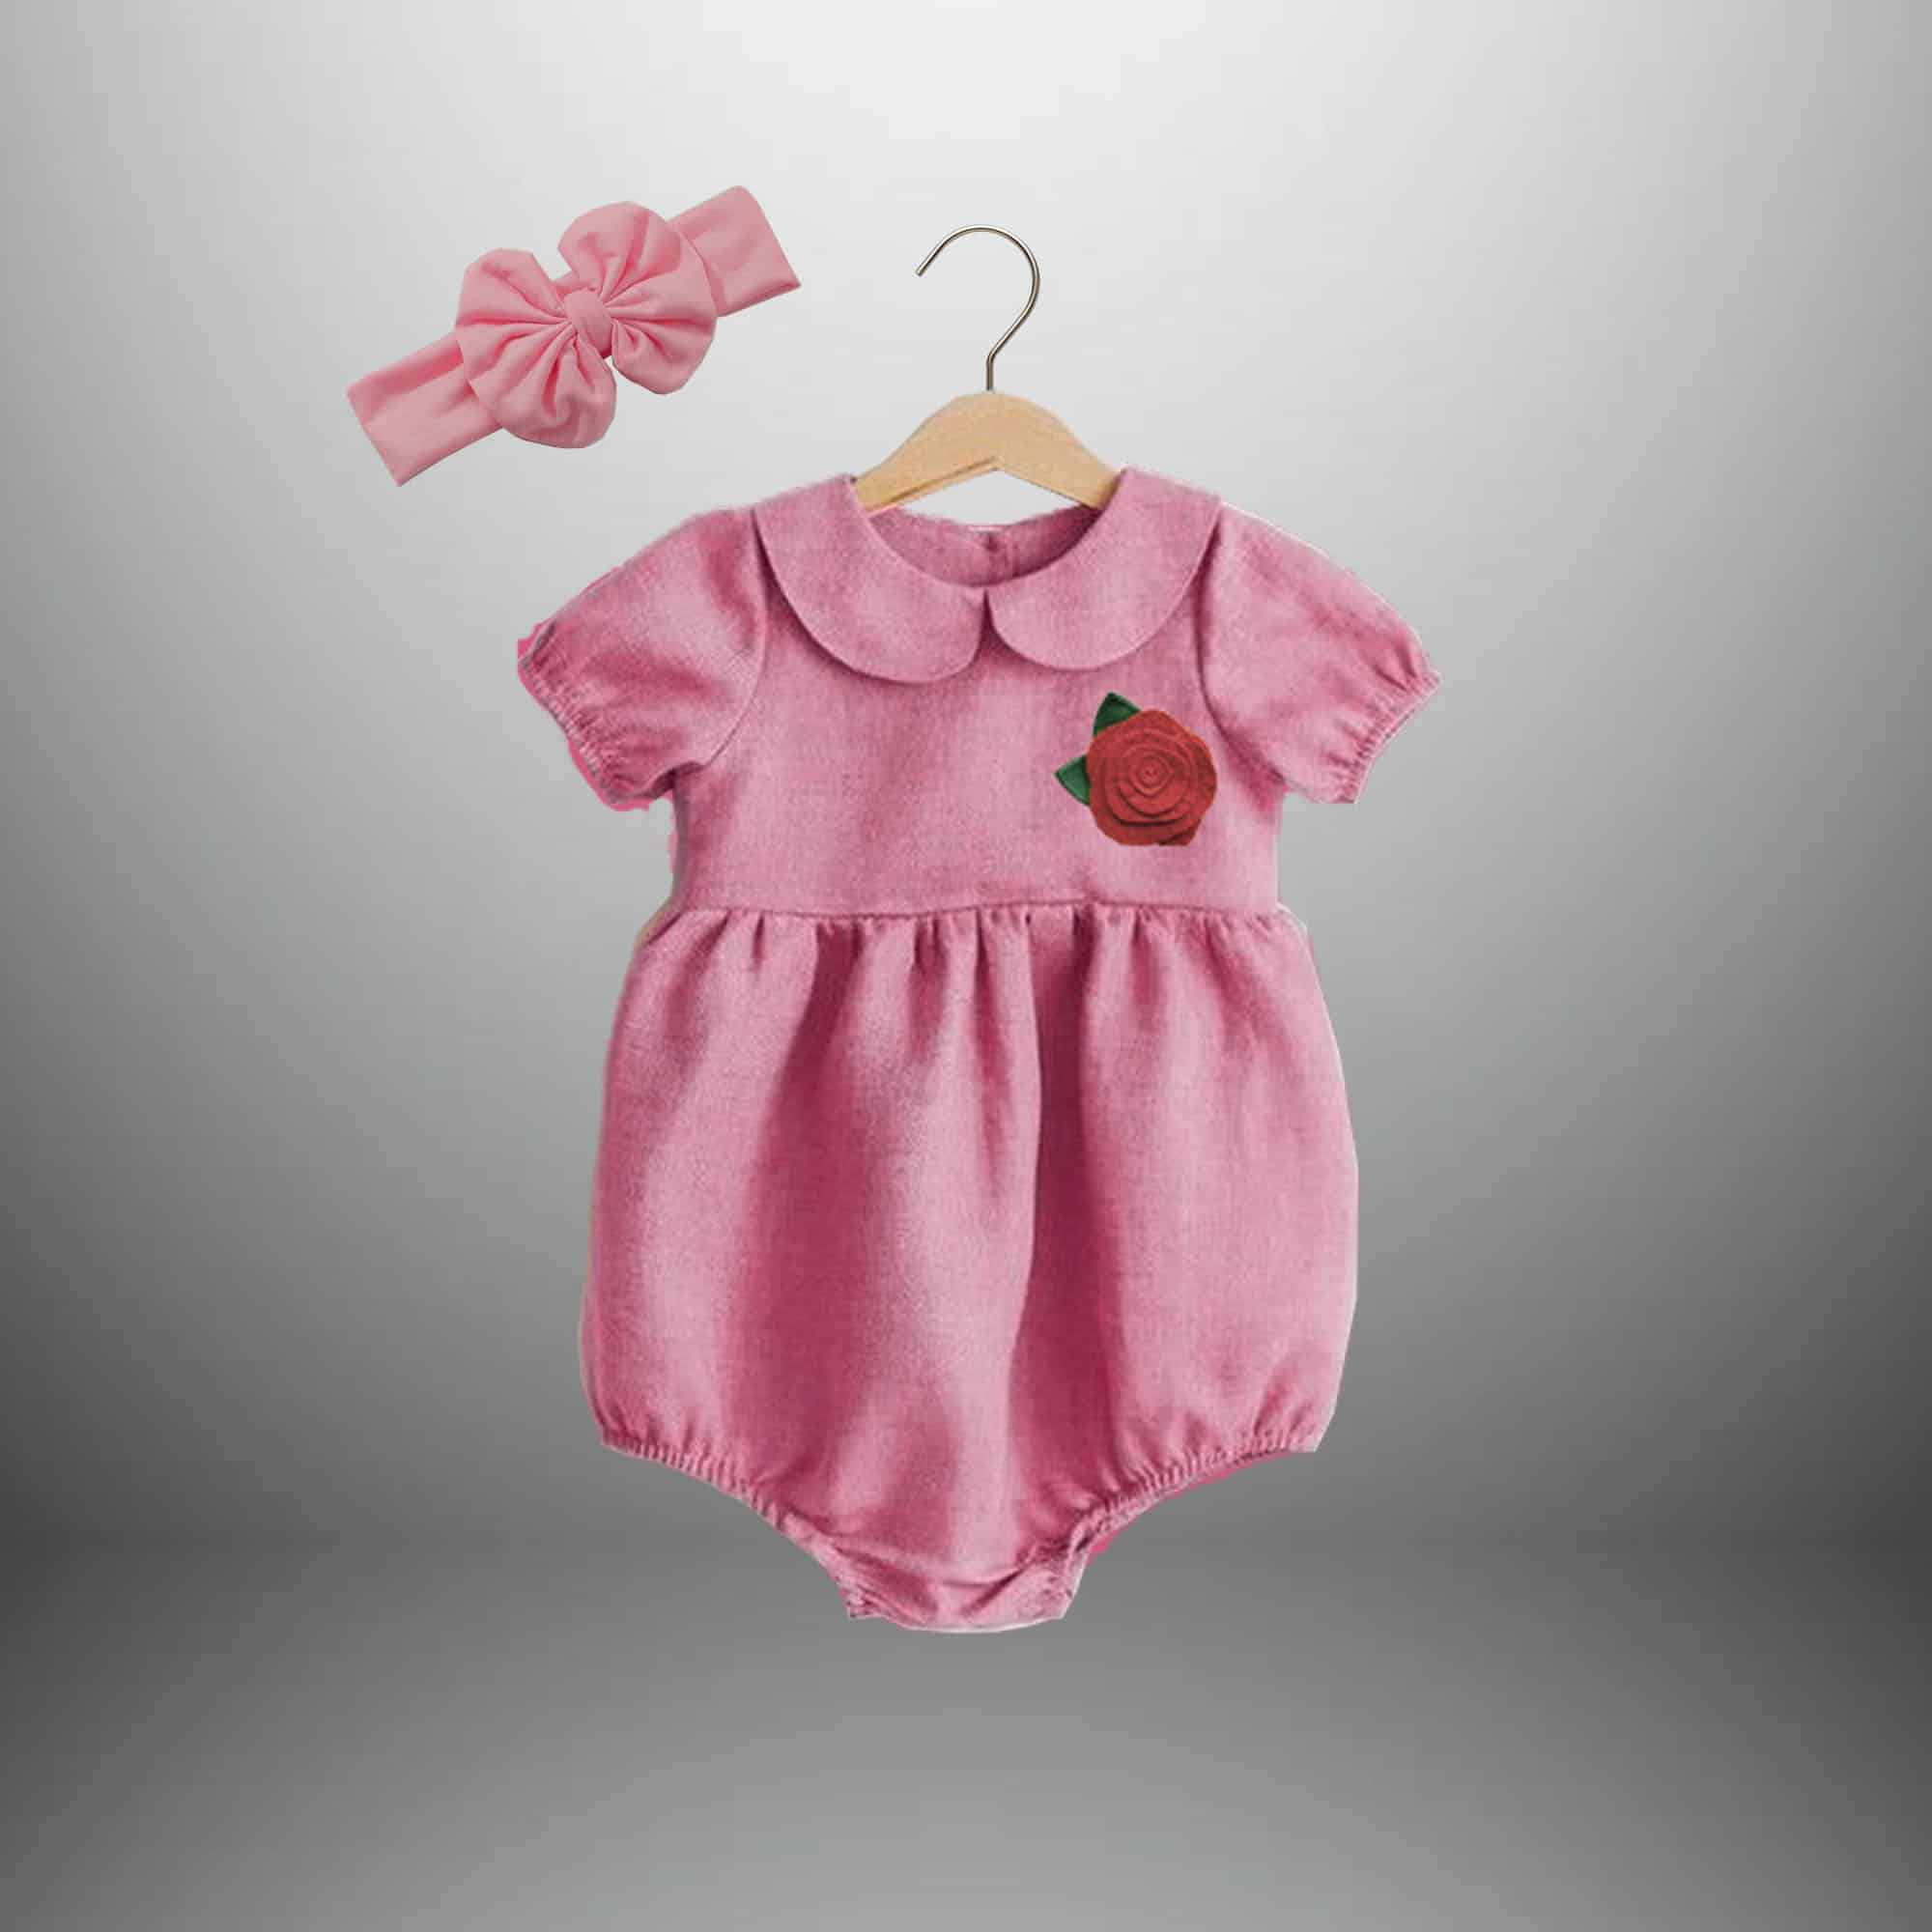 Baby Girl's pink Romper with a Red Rose and a free Hairband-RKFCTT066